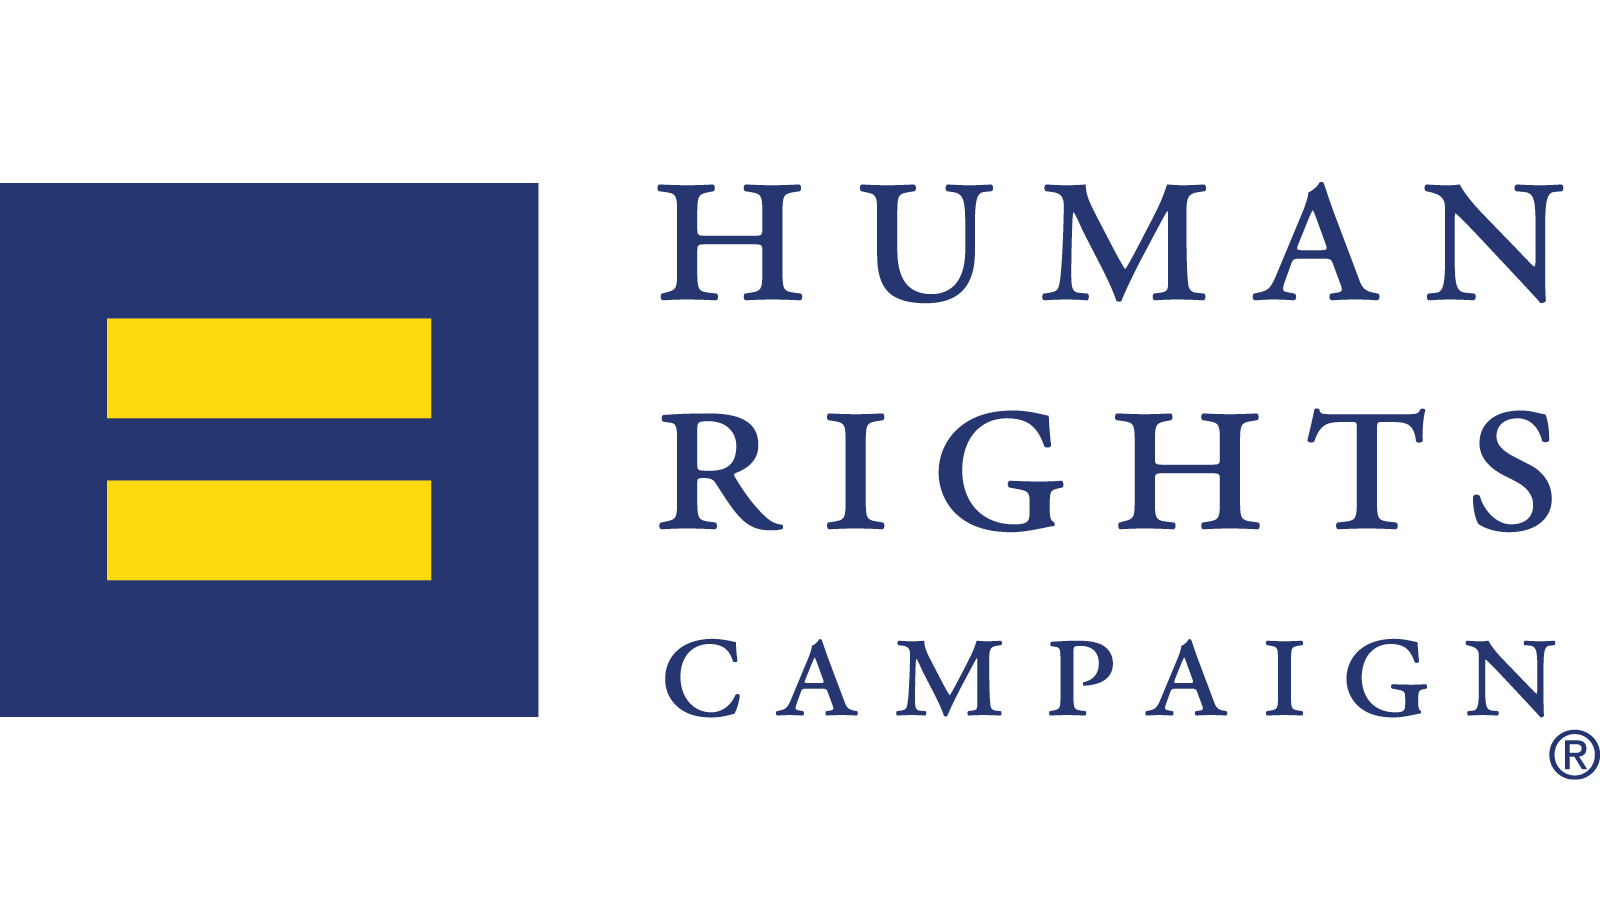 HRC Logo - HRC Officially Adopts Use of “LGBTQ” | Human Rights Campaign